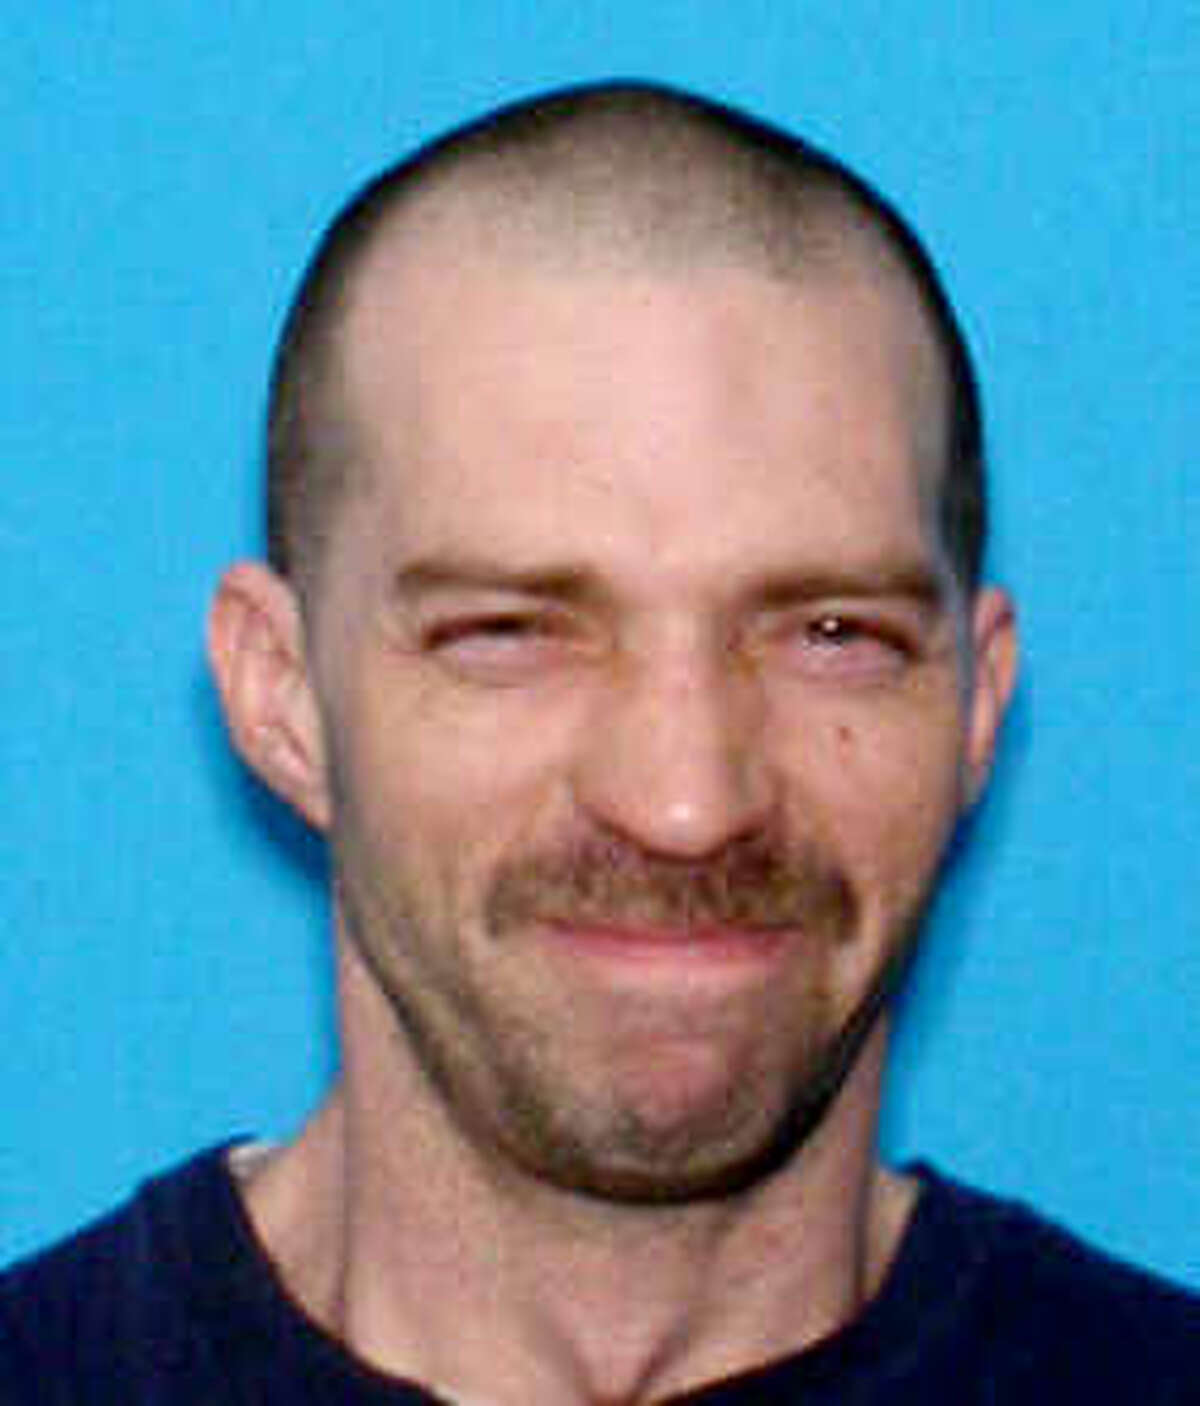 This image shows Richard Allen Ashbrook in 2005. The picture was uploaded April 11, 2019, to the National Missing and Unidentified Persons System. Human remains found at a property in Pleasant Plains Township were recently identified as Ashbrook.